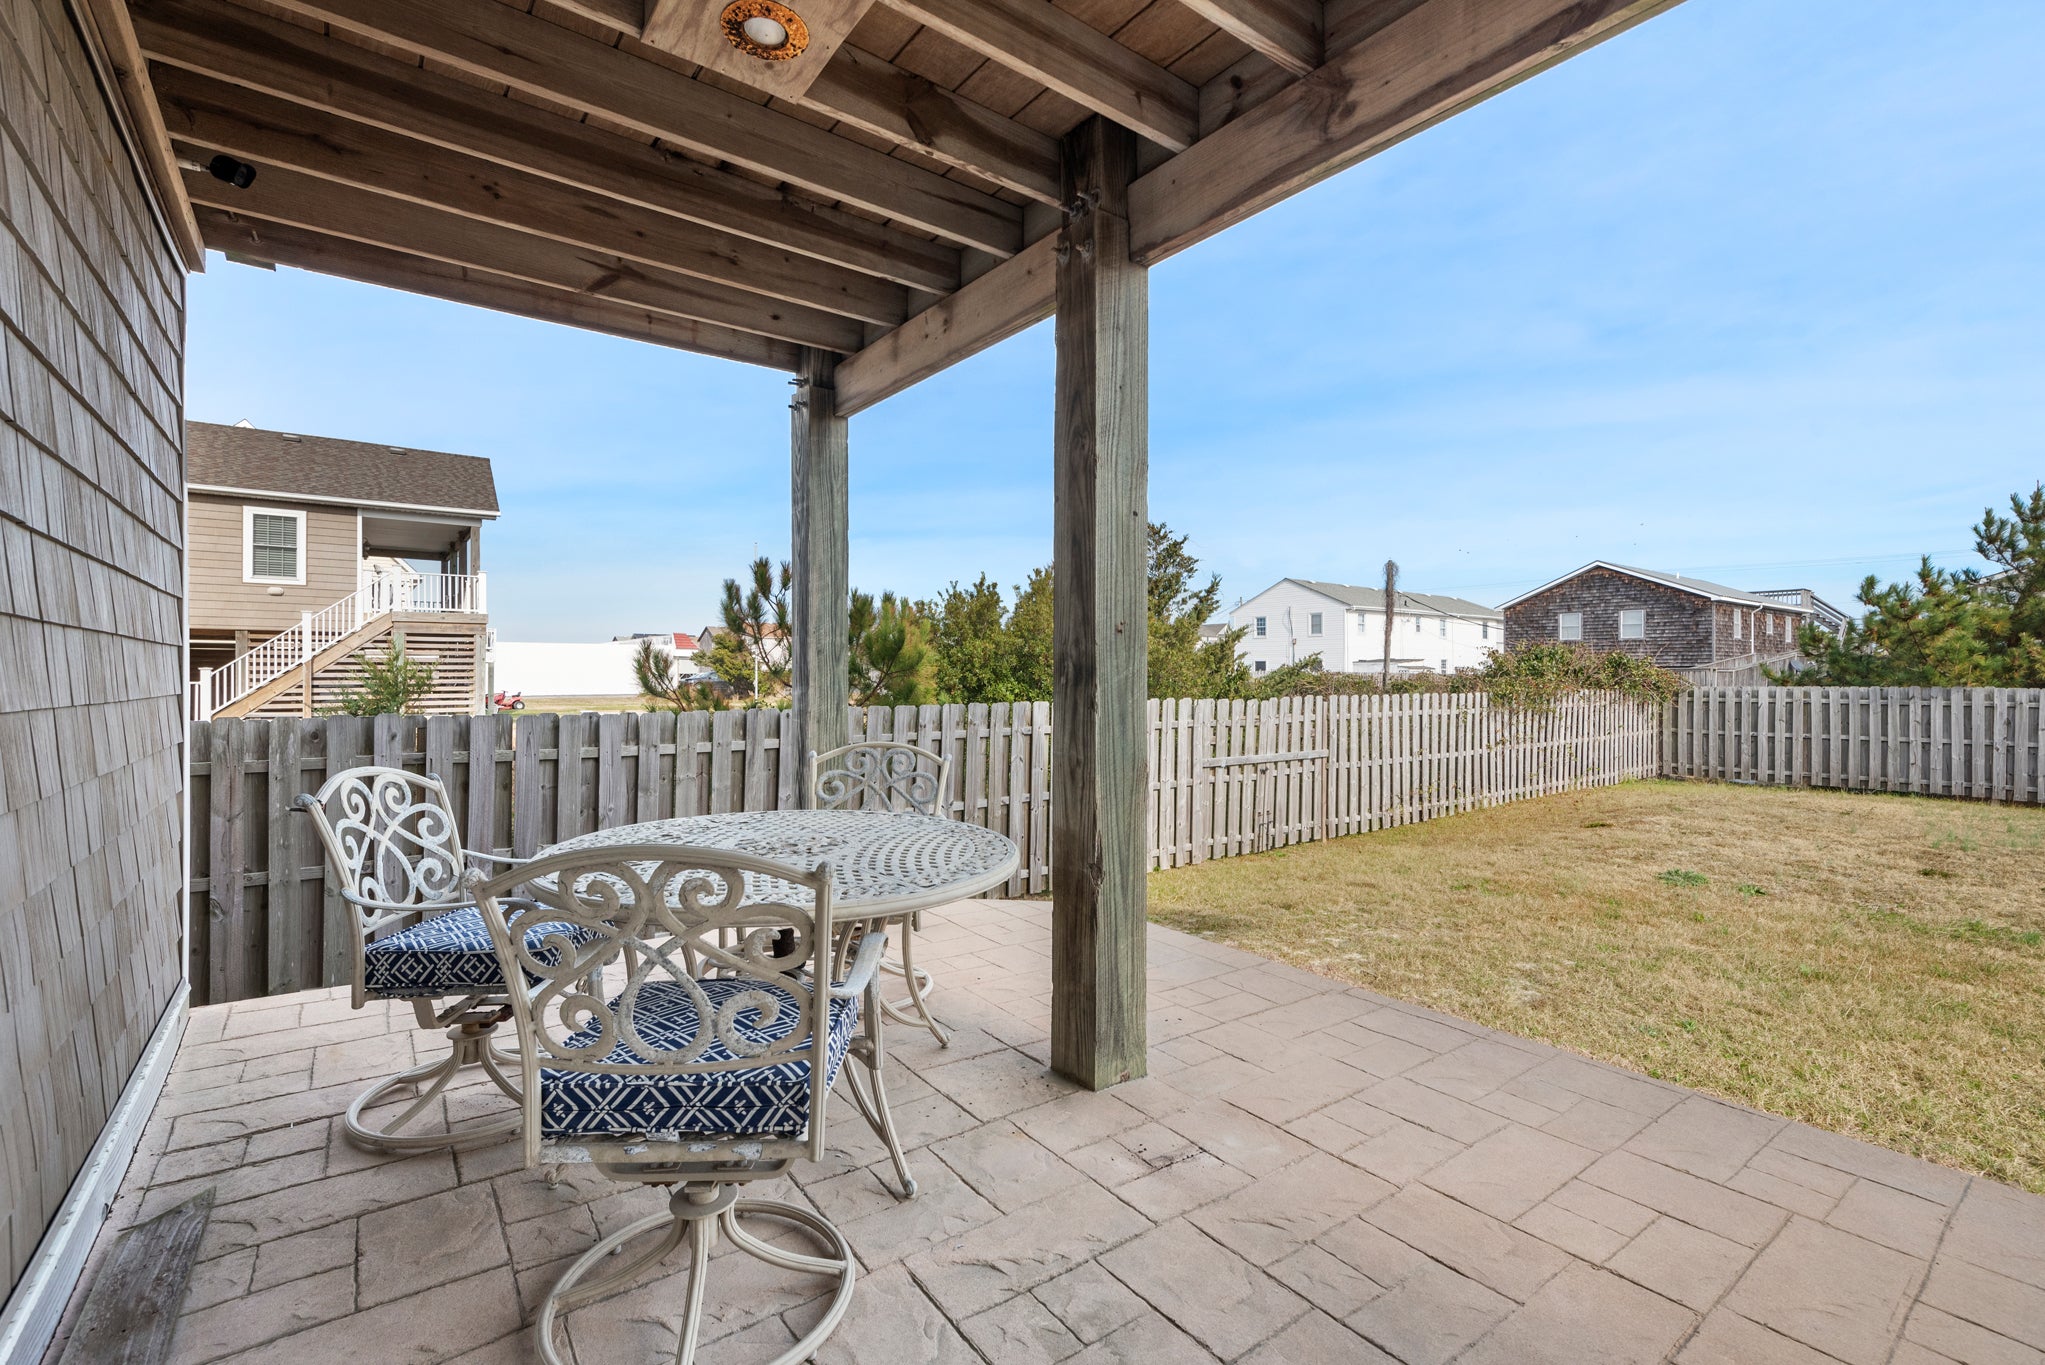 KDS3633: Another Day In Paradise | Bottom Level Patio & Fenced Backyard